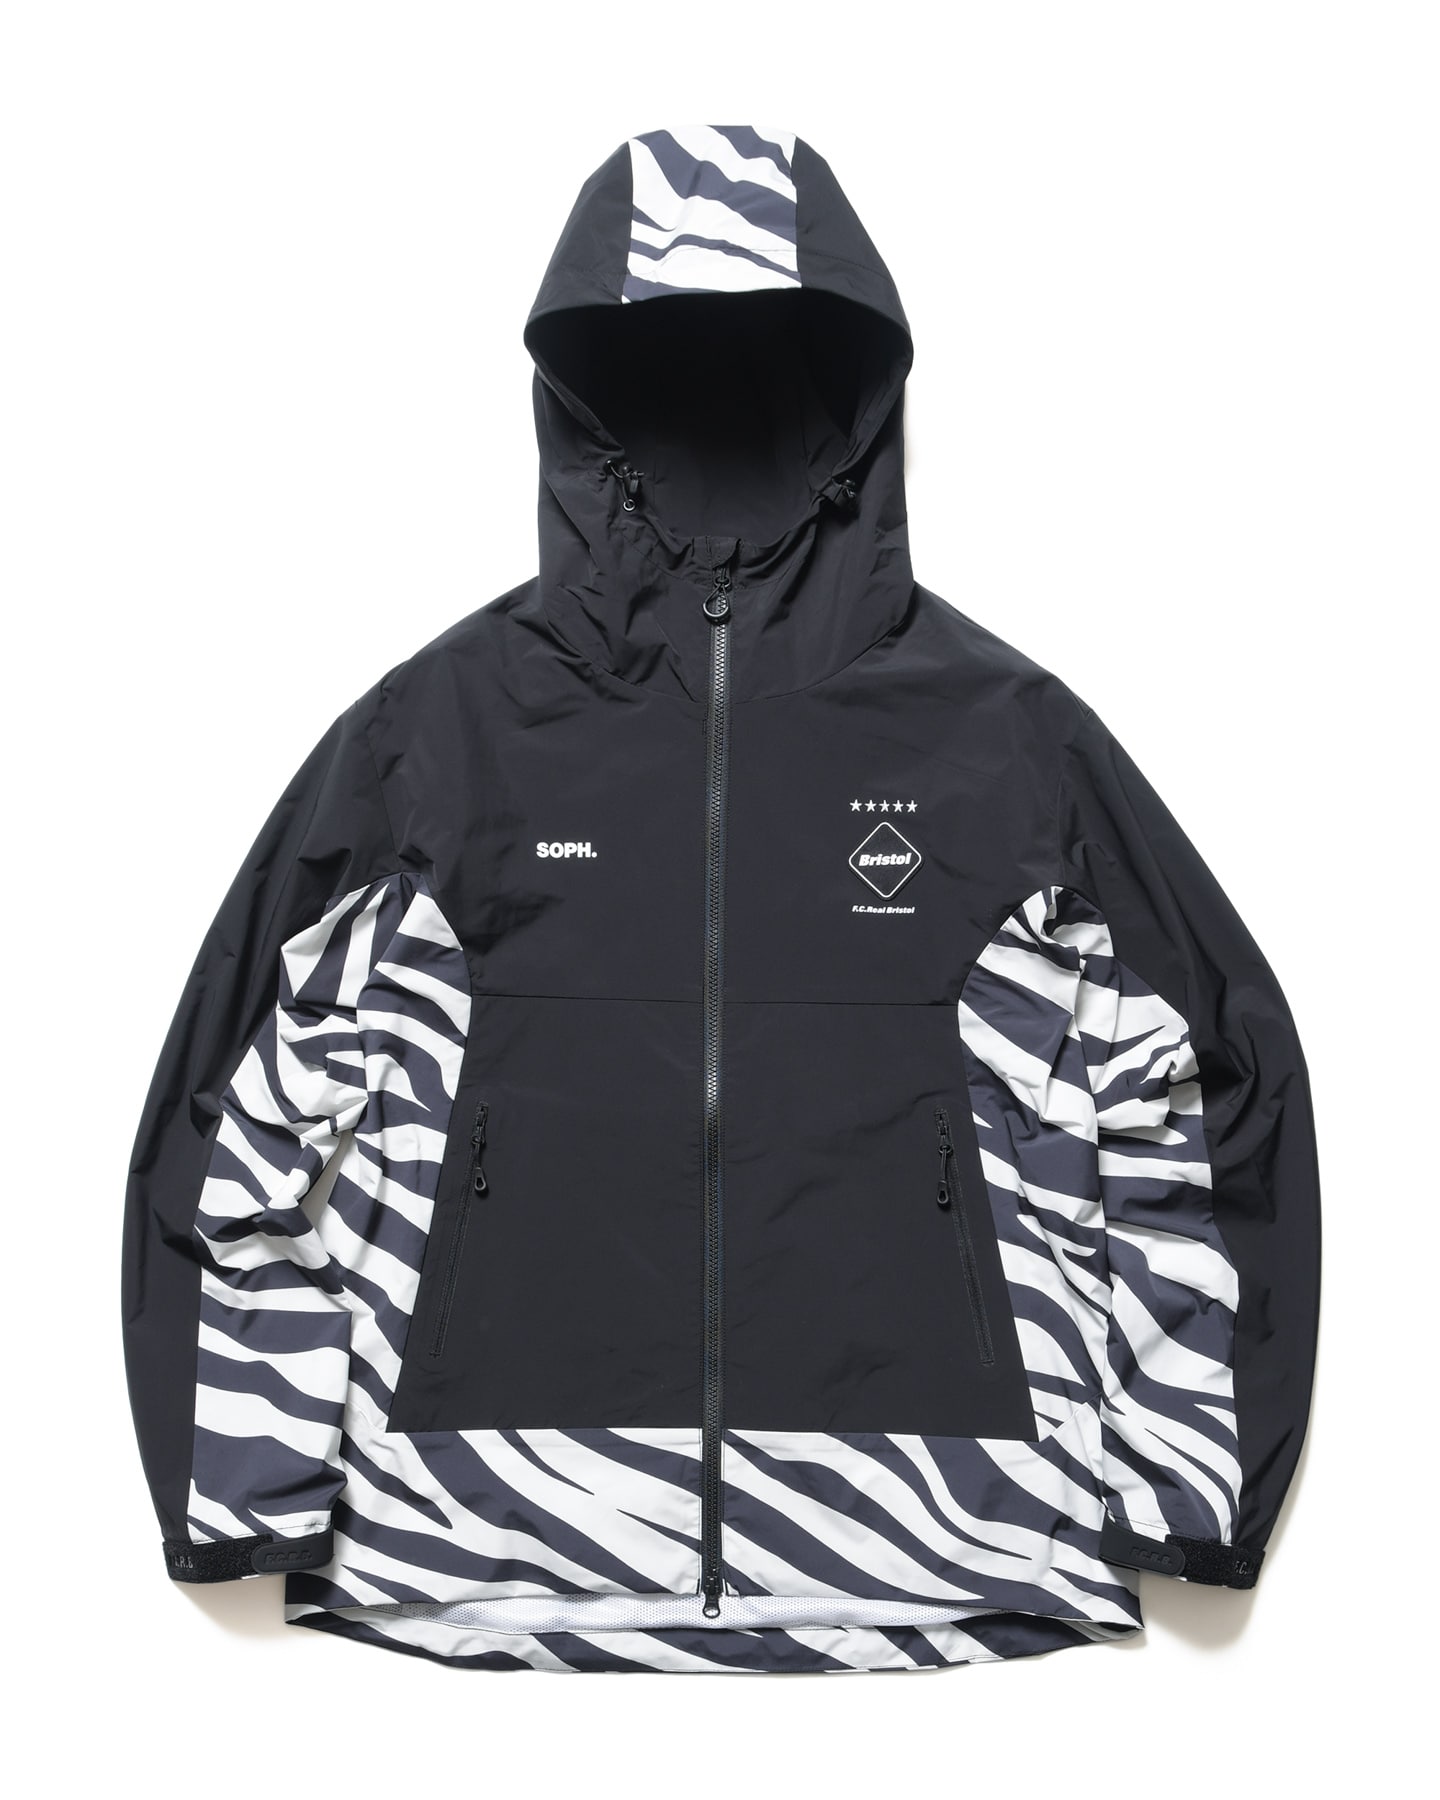 fcrb separate practice jacket 上下セットアップセットアップ